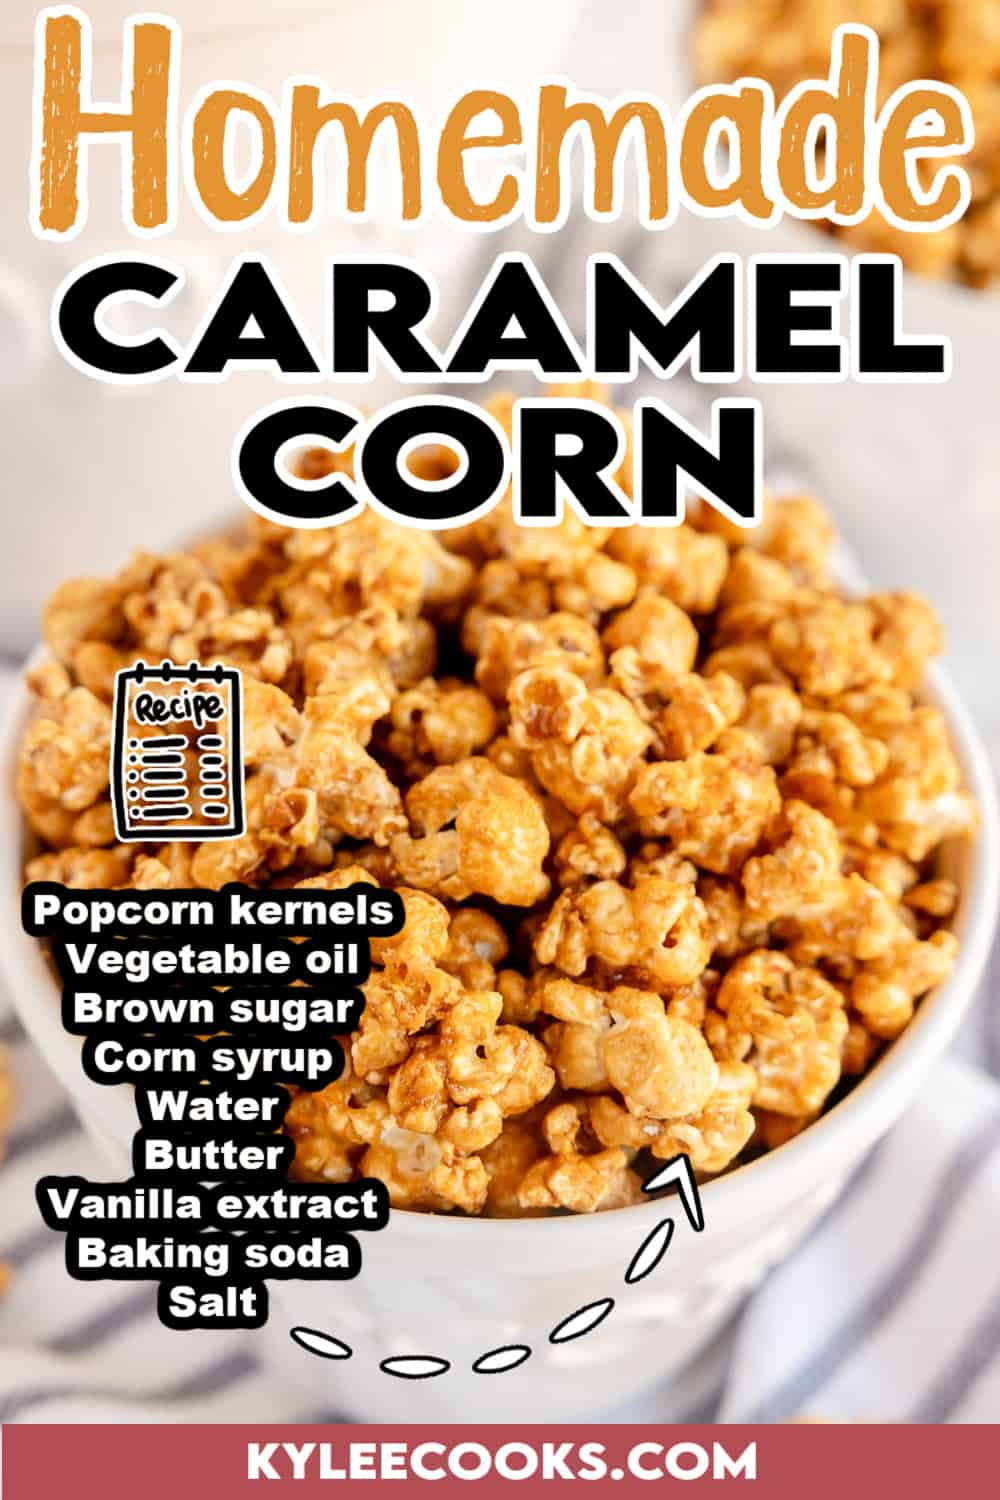 caramel corn in a white ceramic bowl with recipe name and ingredients overlaid in text.